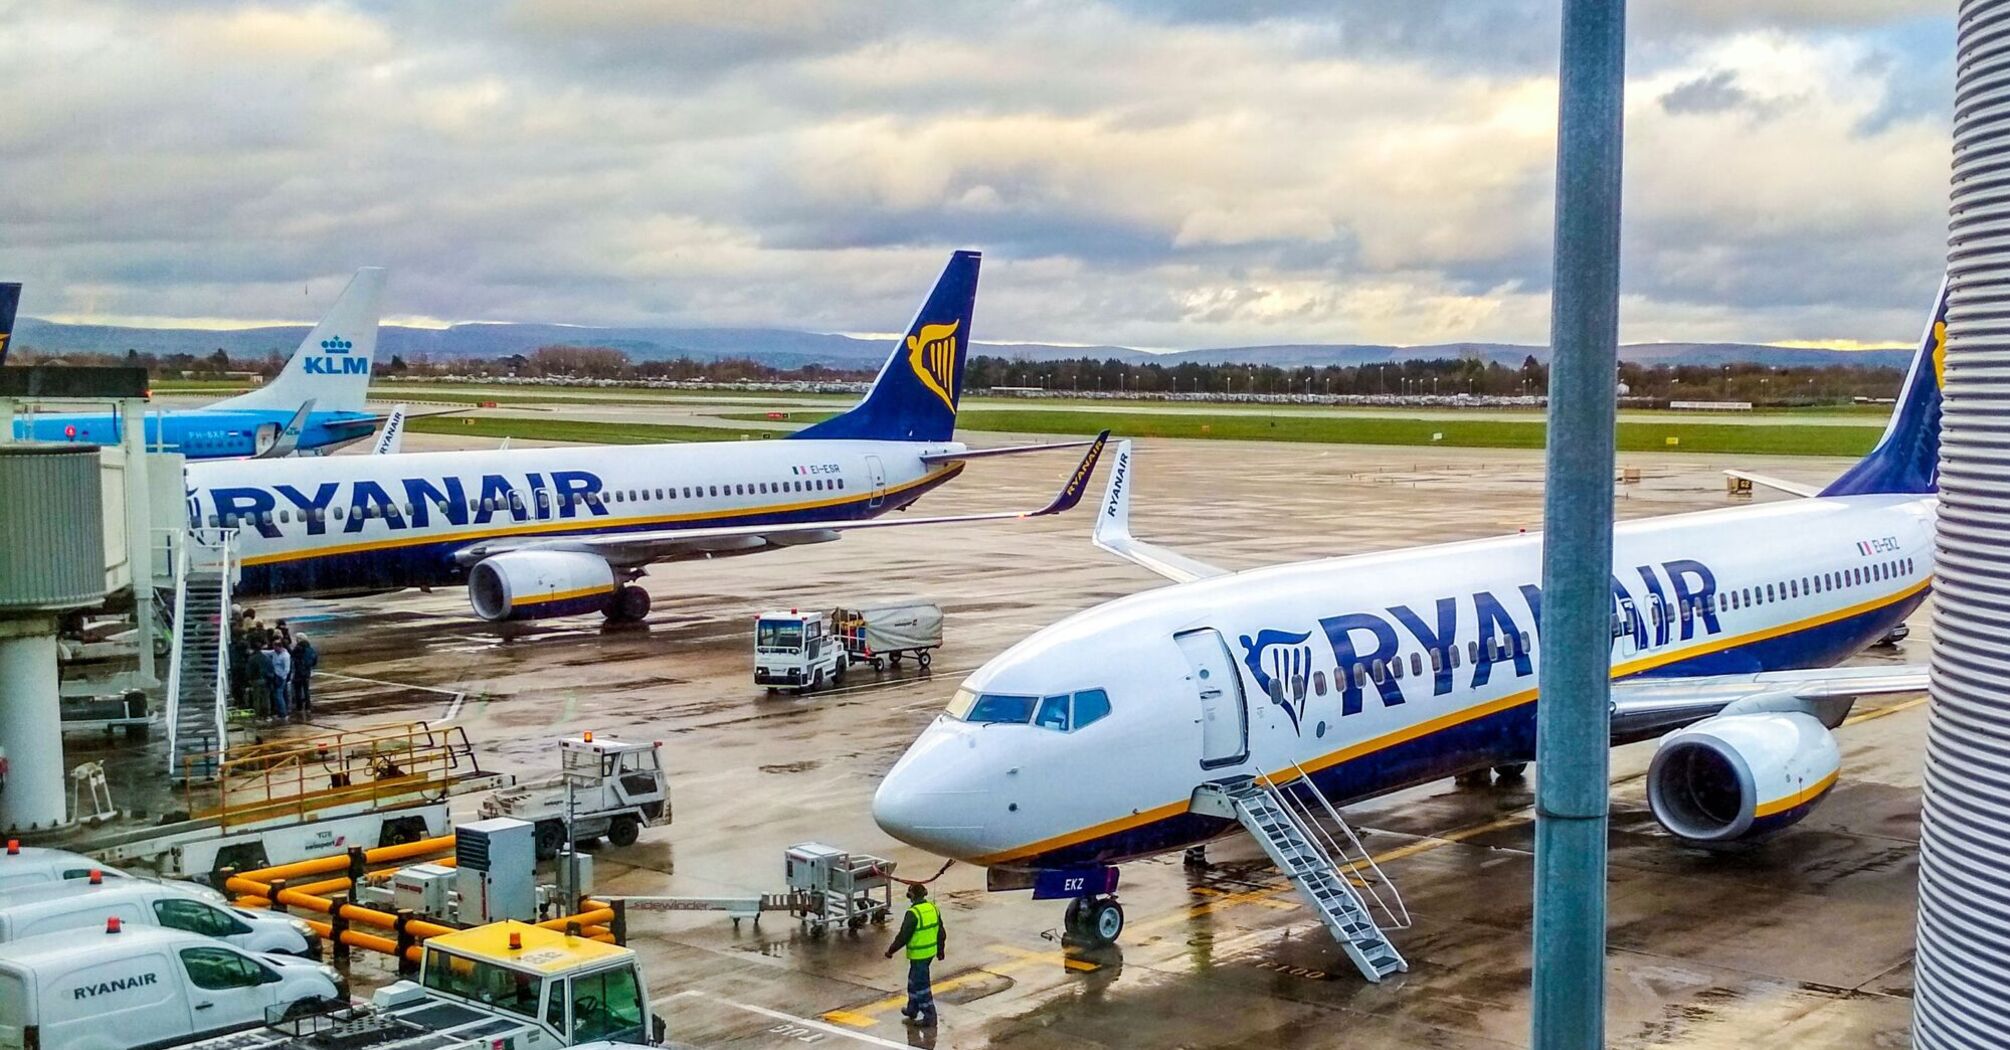 New offers for Ryanair customers: the company offers to receive free parking for checked bags